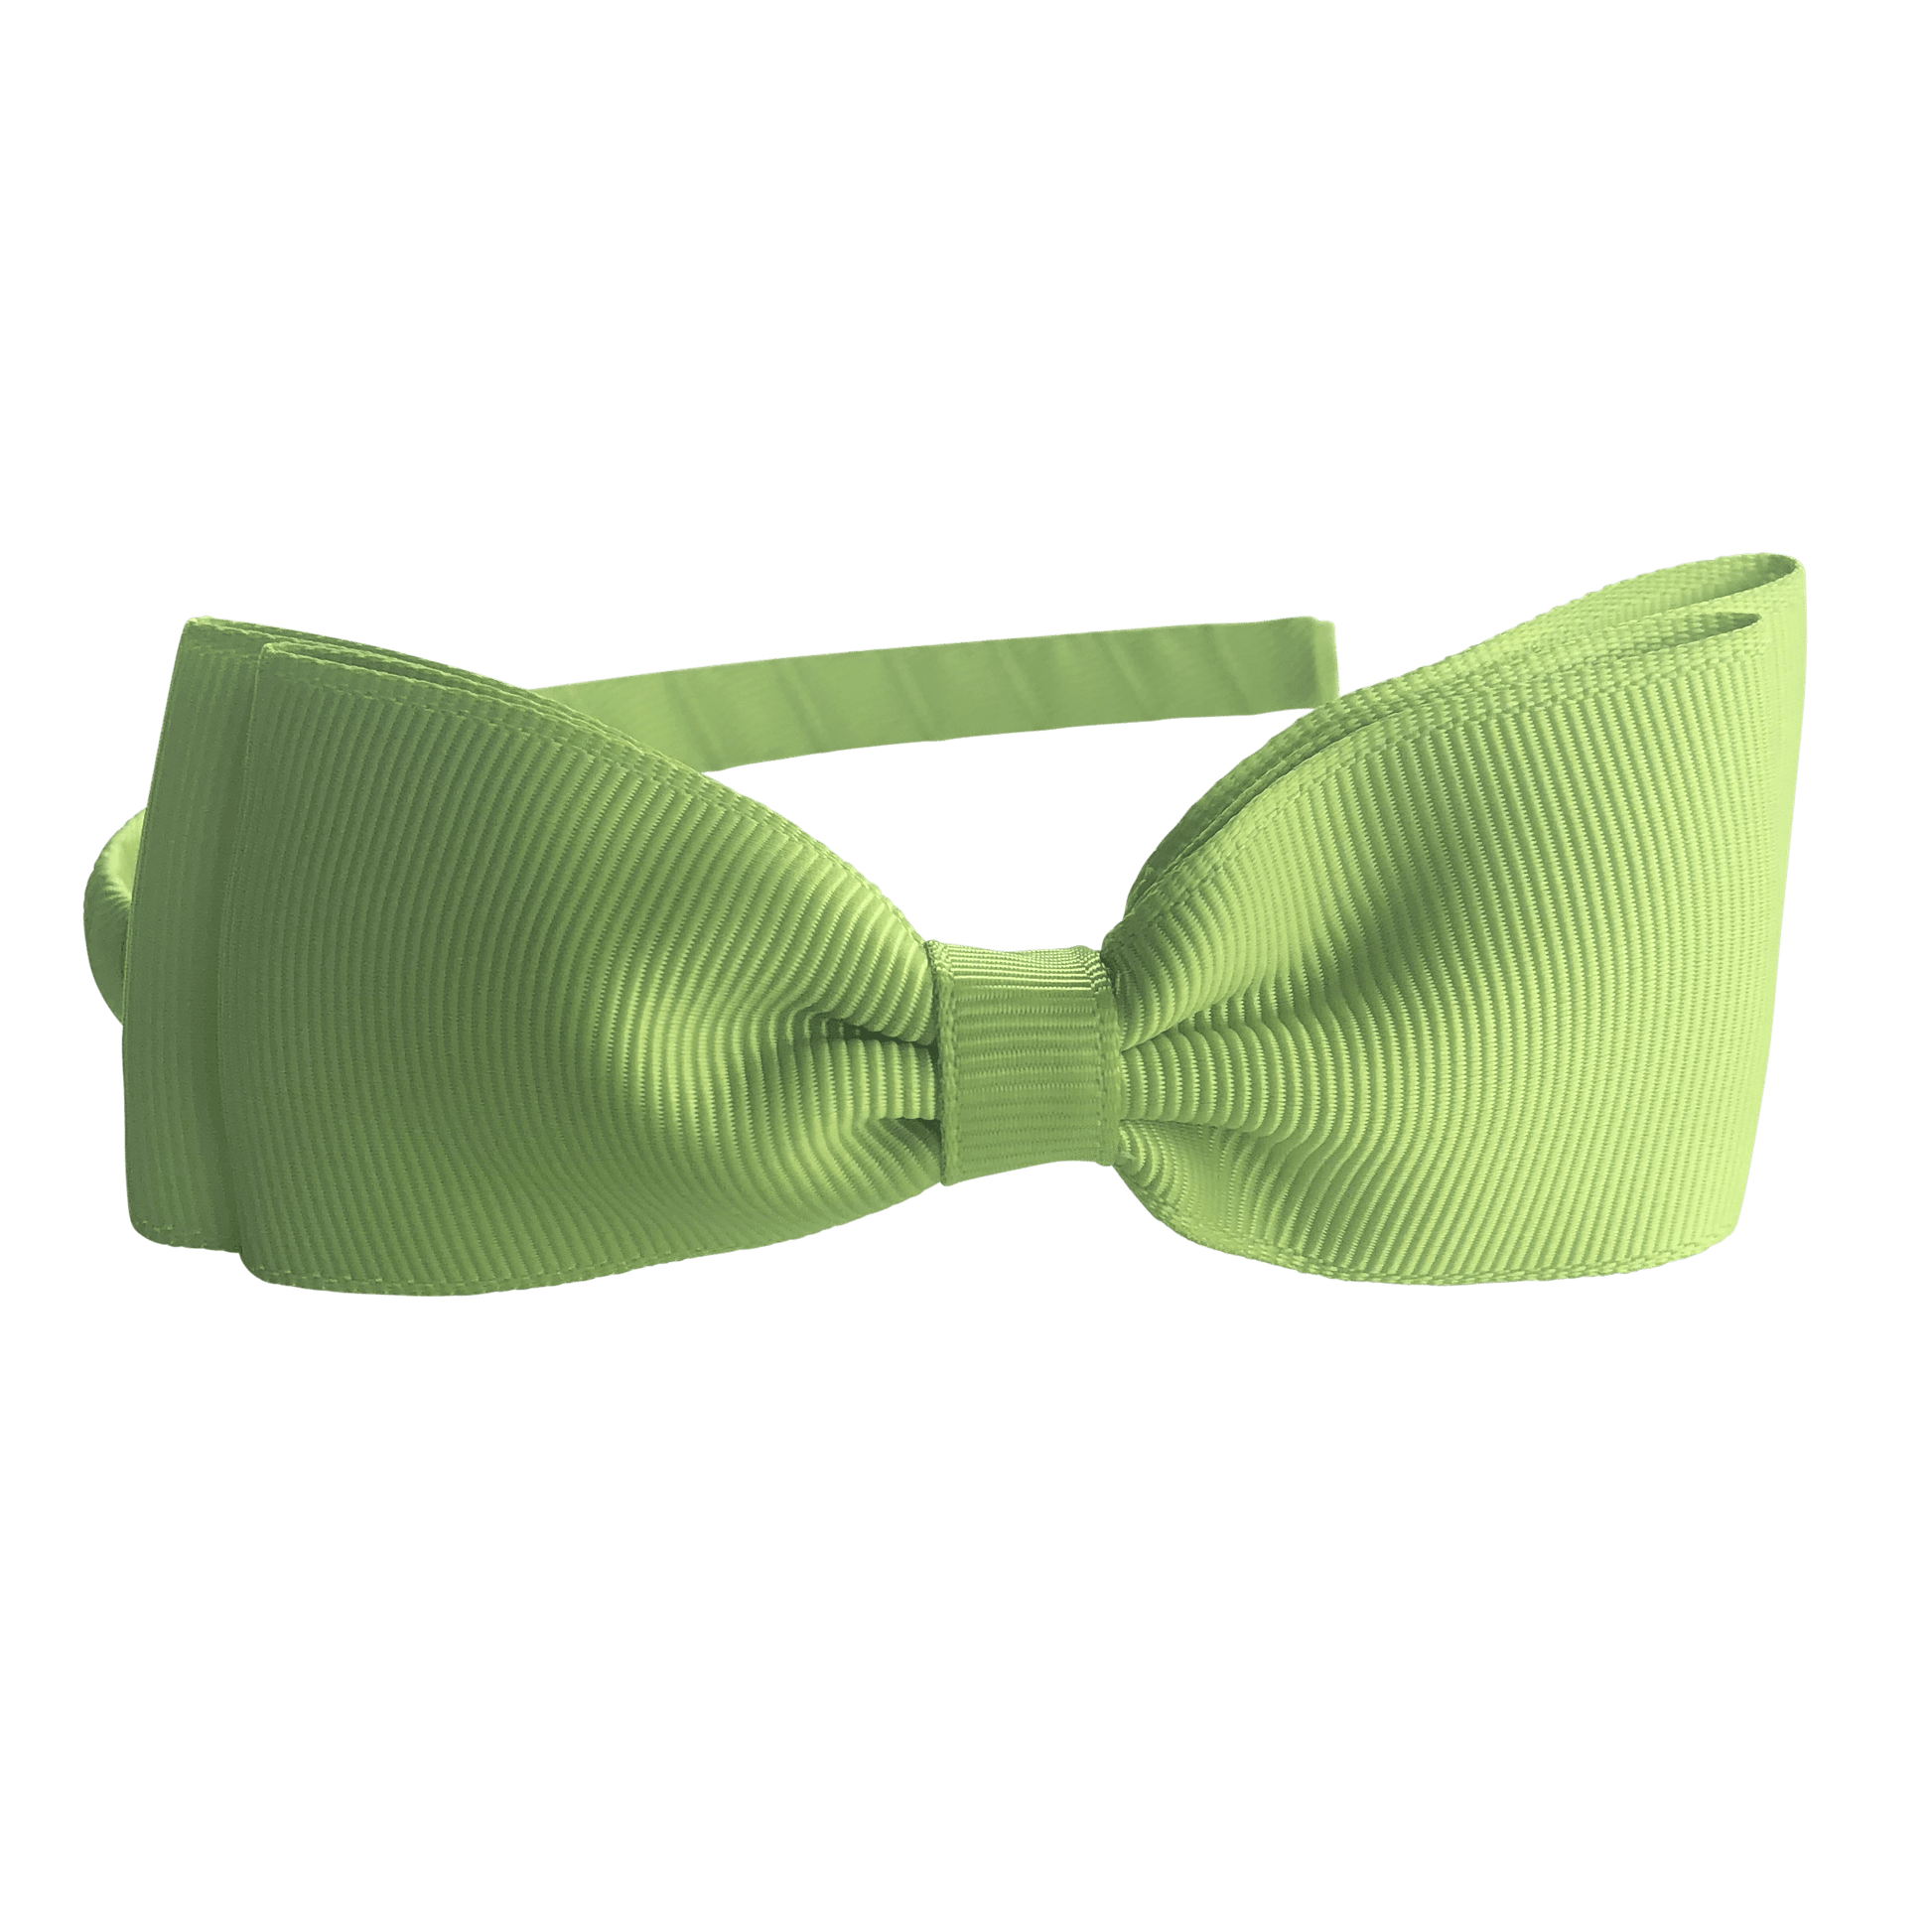 Headband with Bowtie - Solid Colours - Headbands - School Uniform Hair Accessories - Ponytails and Fairytales